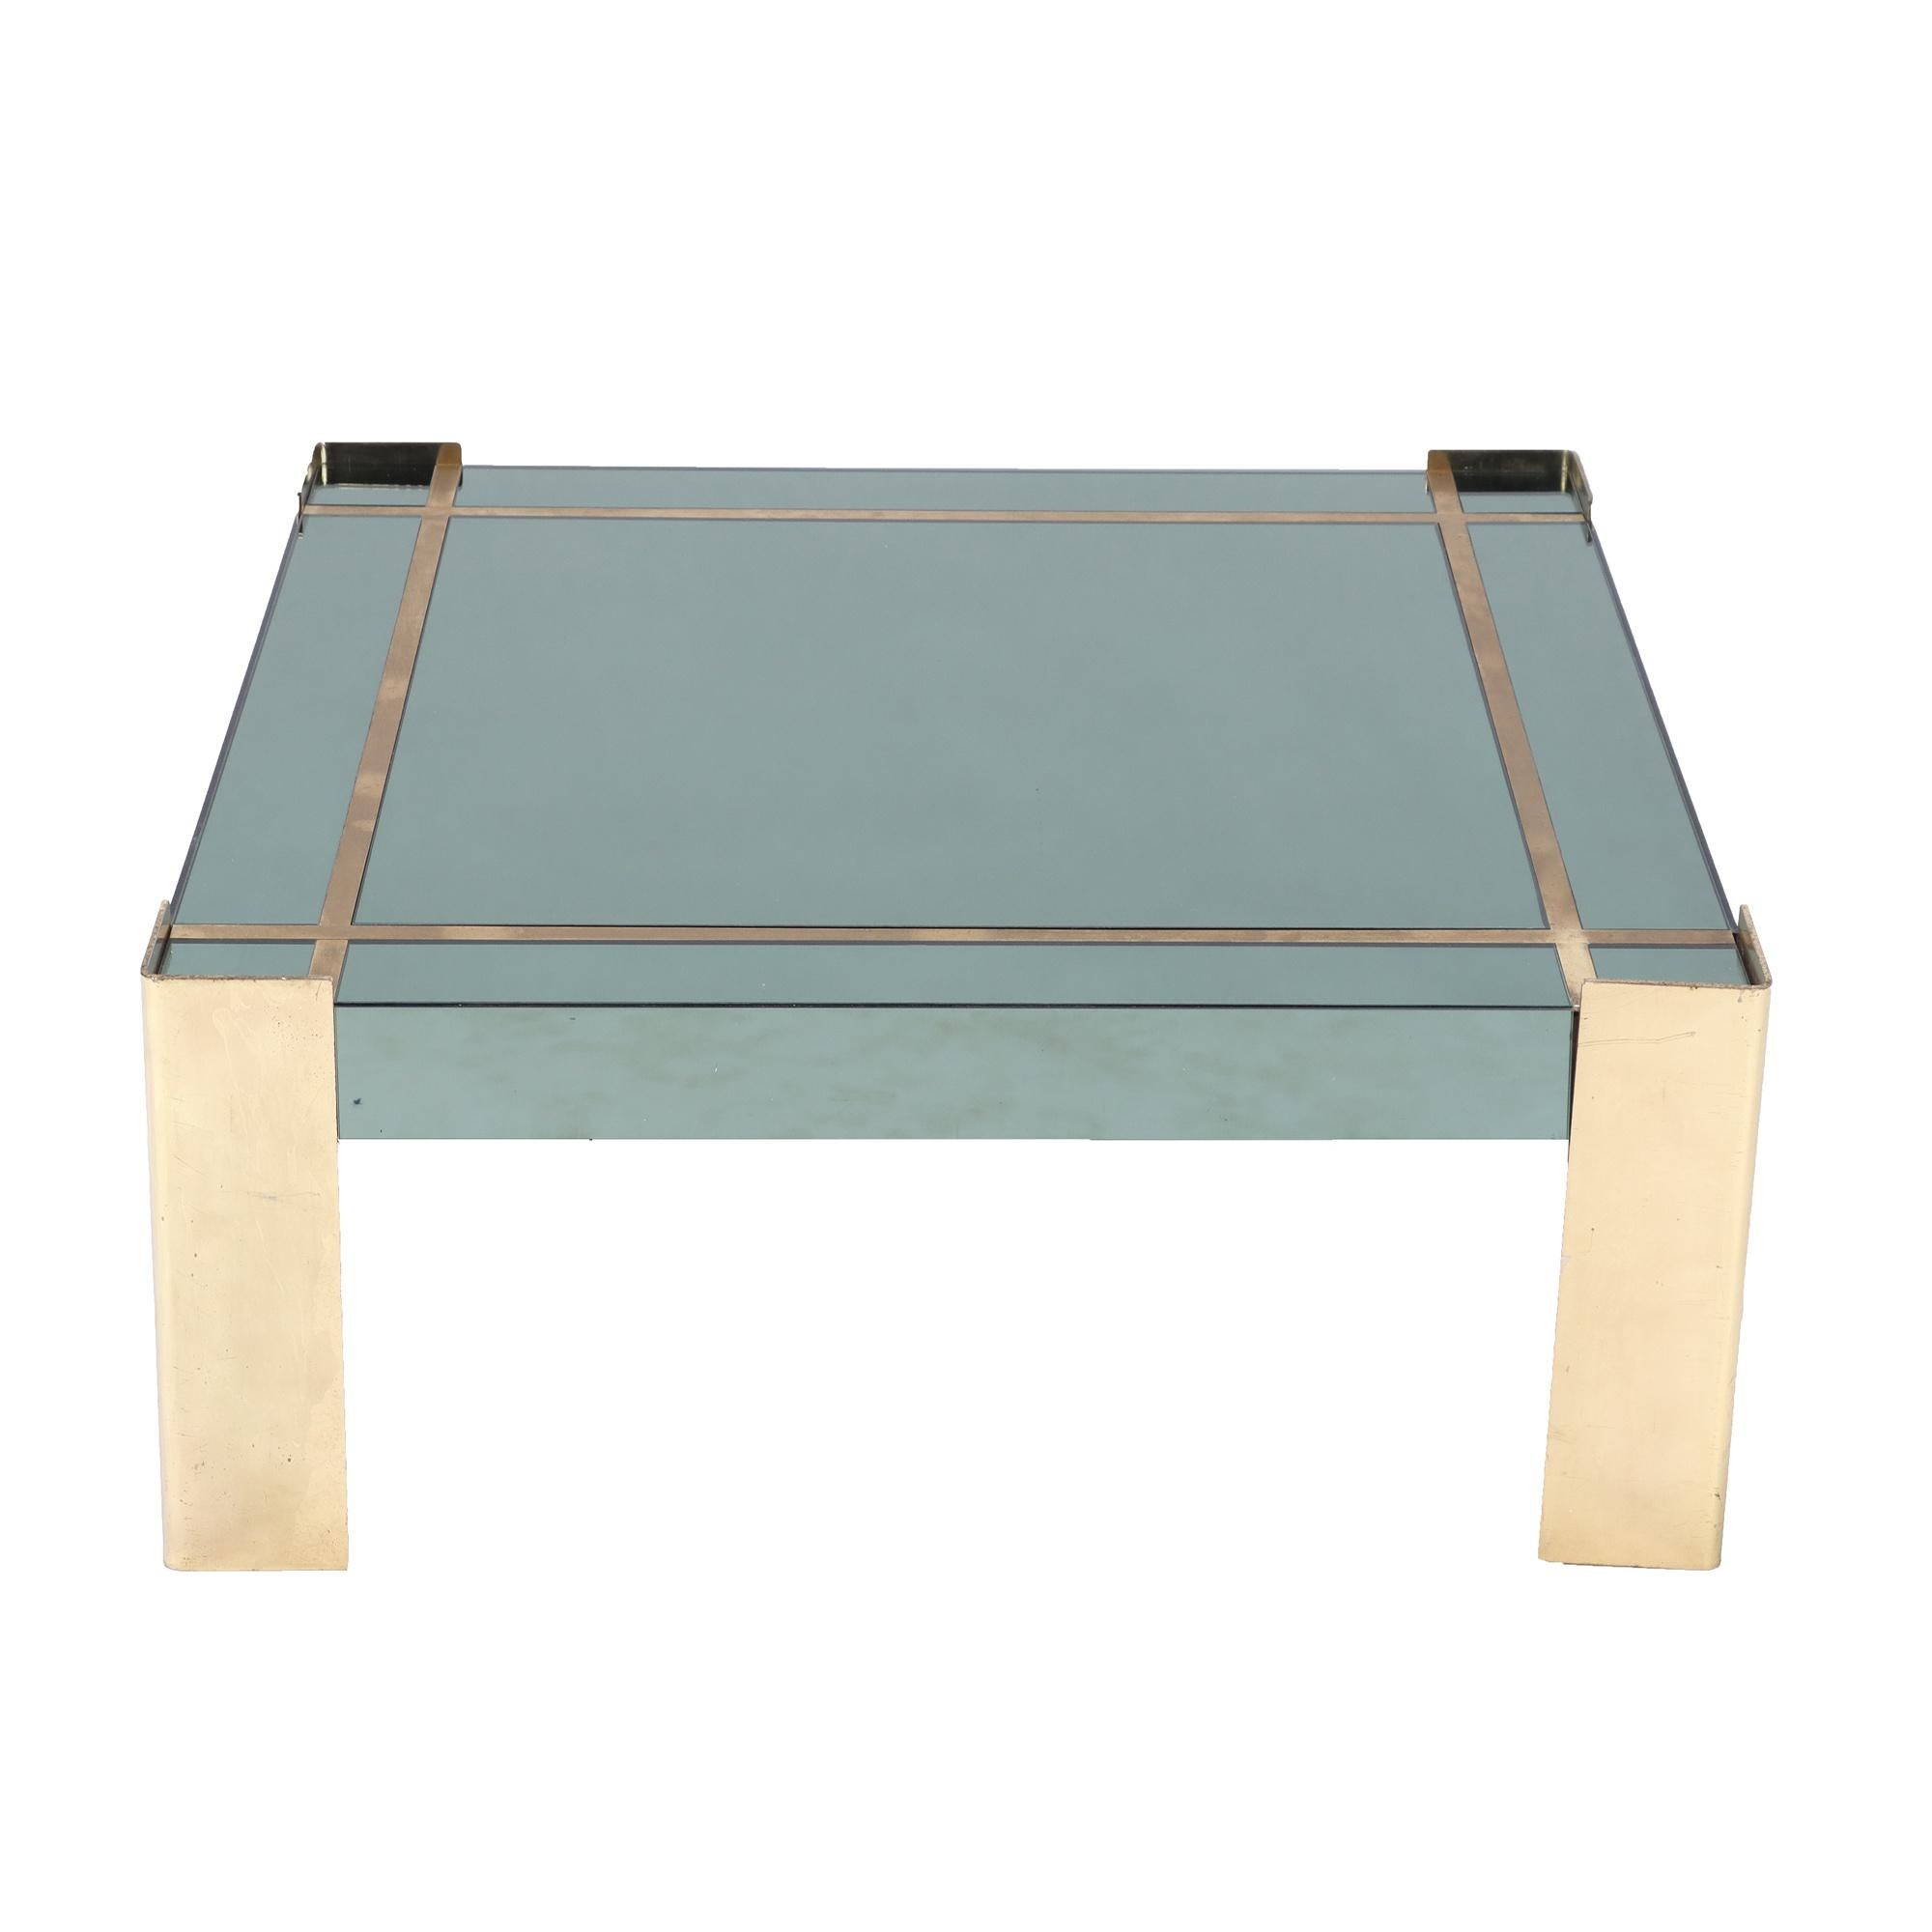 A Mid-Century Modern green glass top coffee table with brass legs and trim. Circa 1970.
Glass chipped on one corner of table.